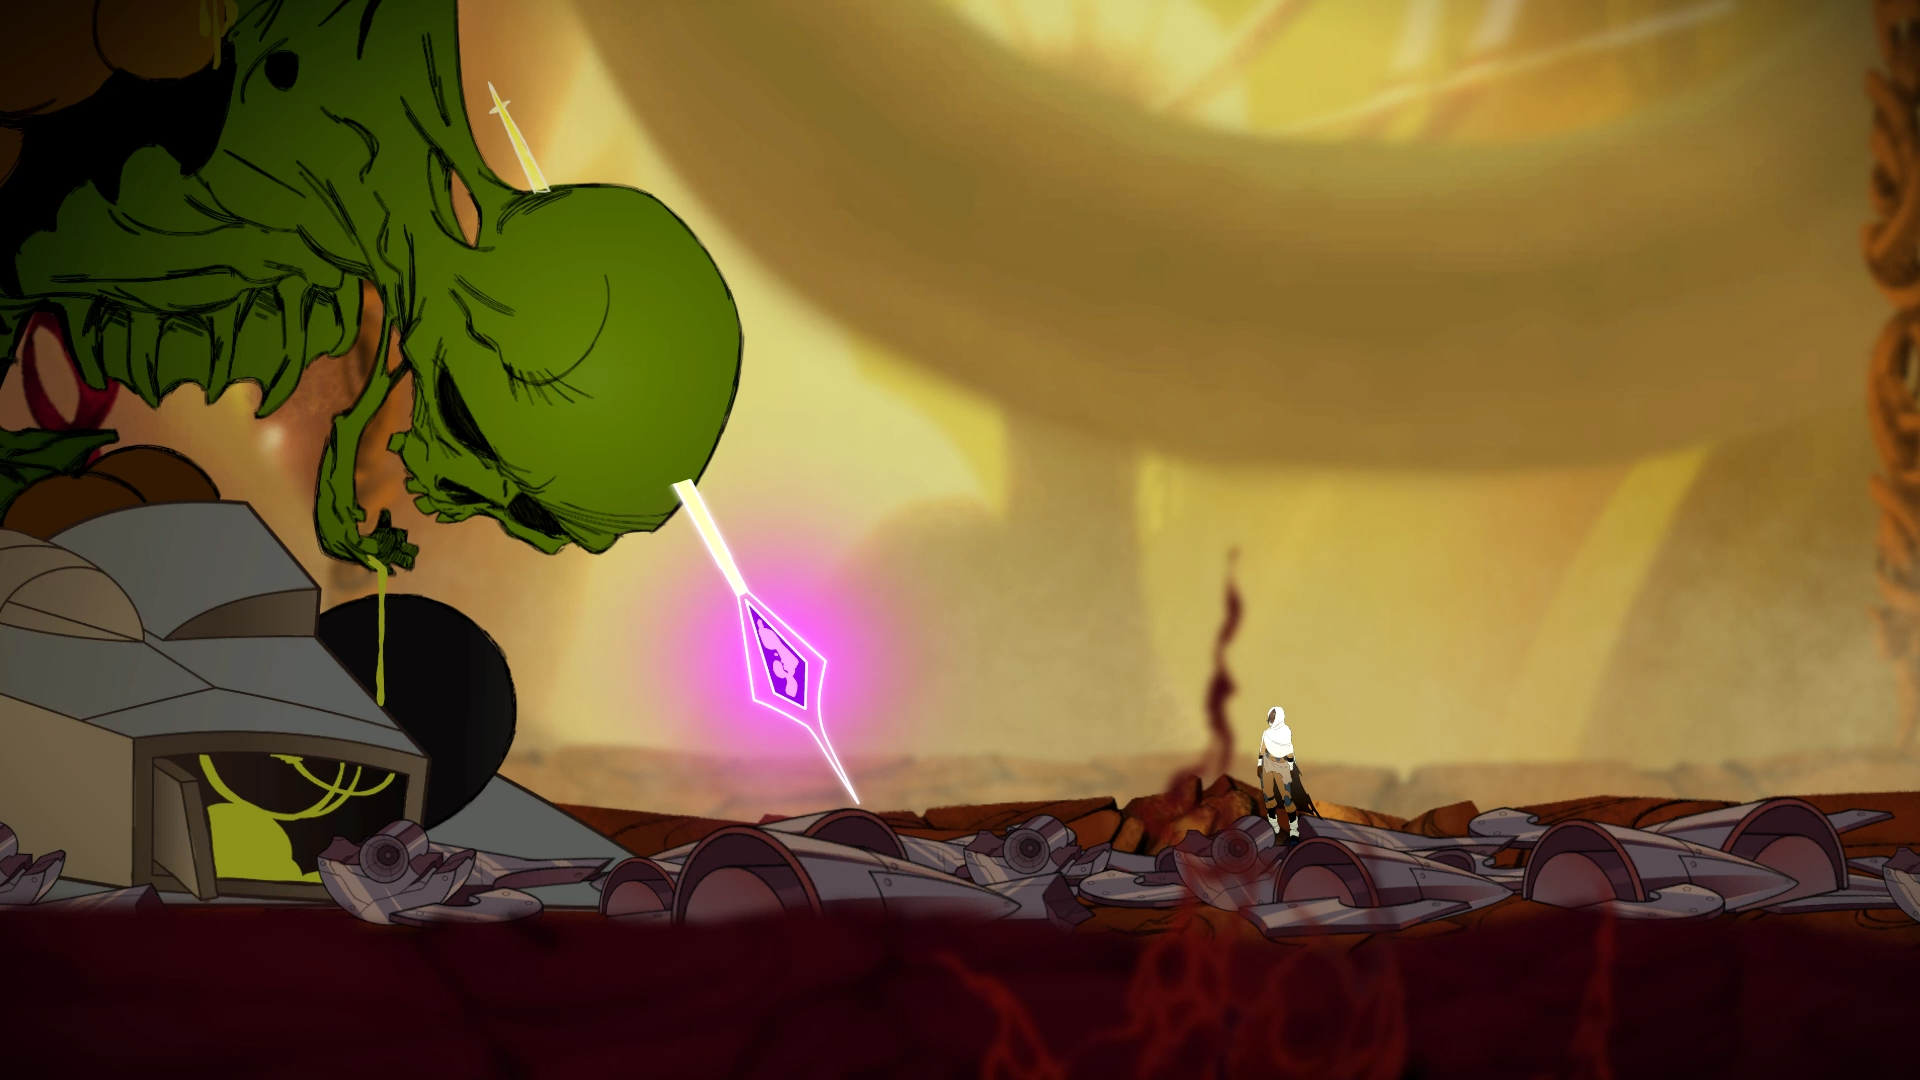 Sundered Is Hand-Drawn Lovecraftian Horror From The Makers Of Jotun